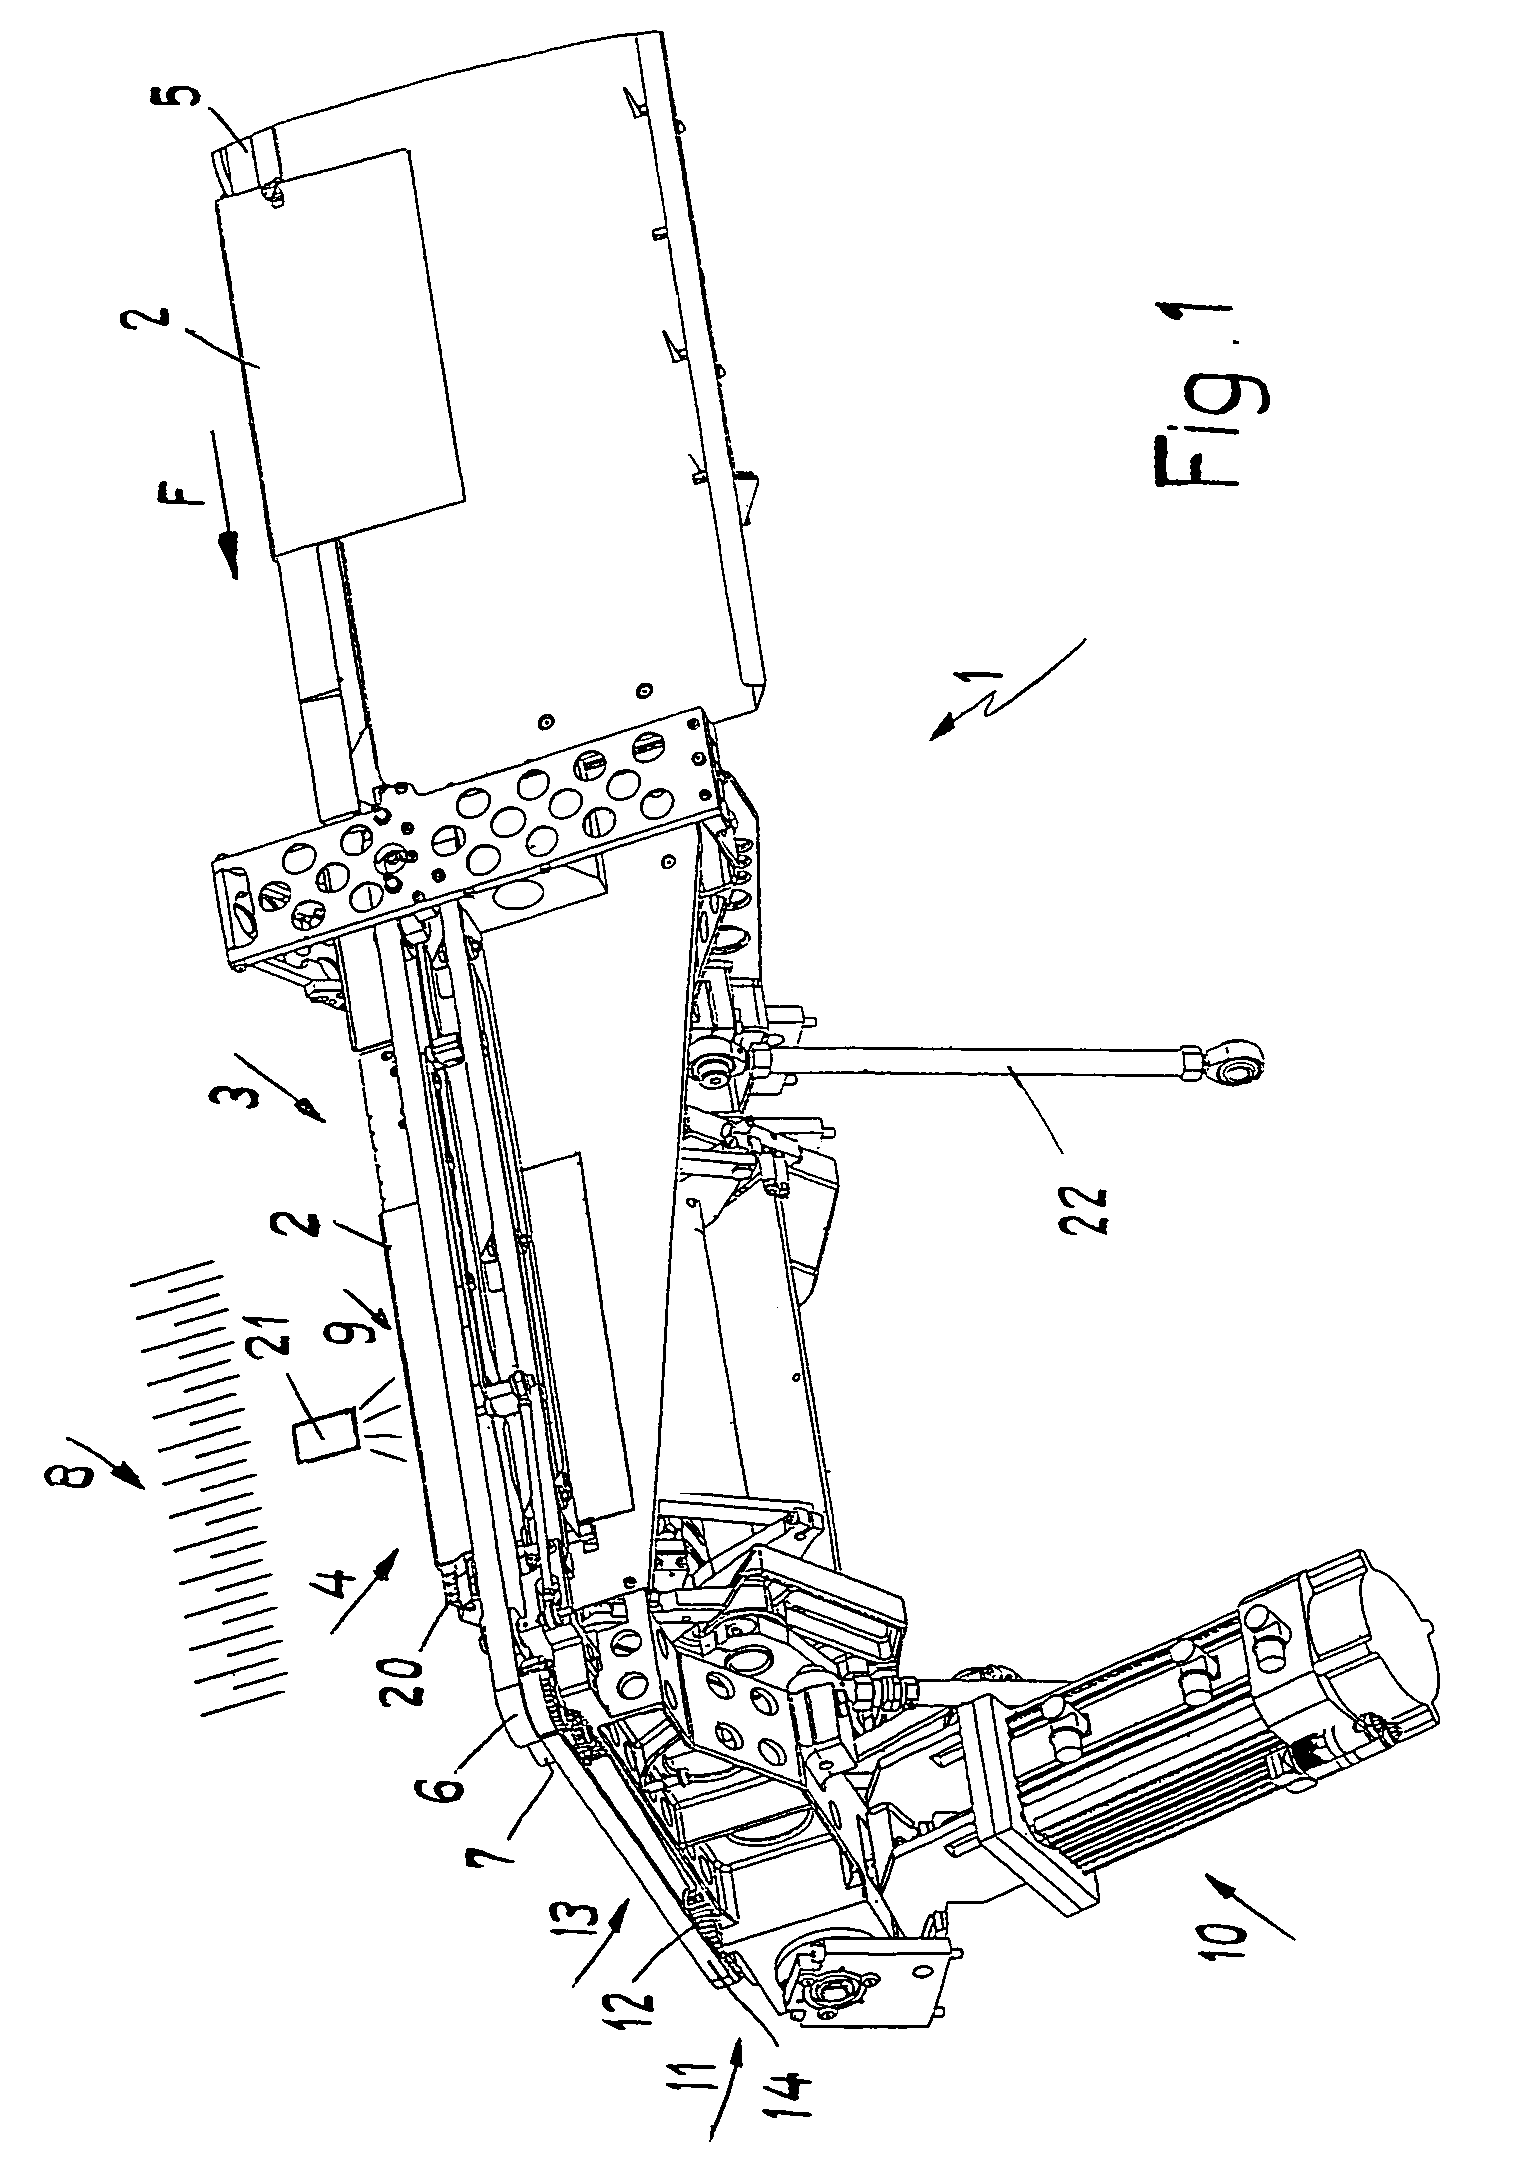 Device for manufacturing thread-stitched book blocks which comprise folded printed sheets